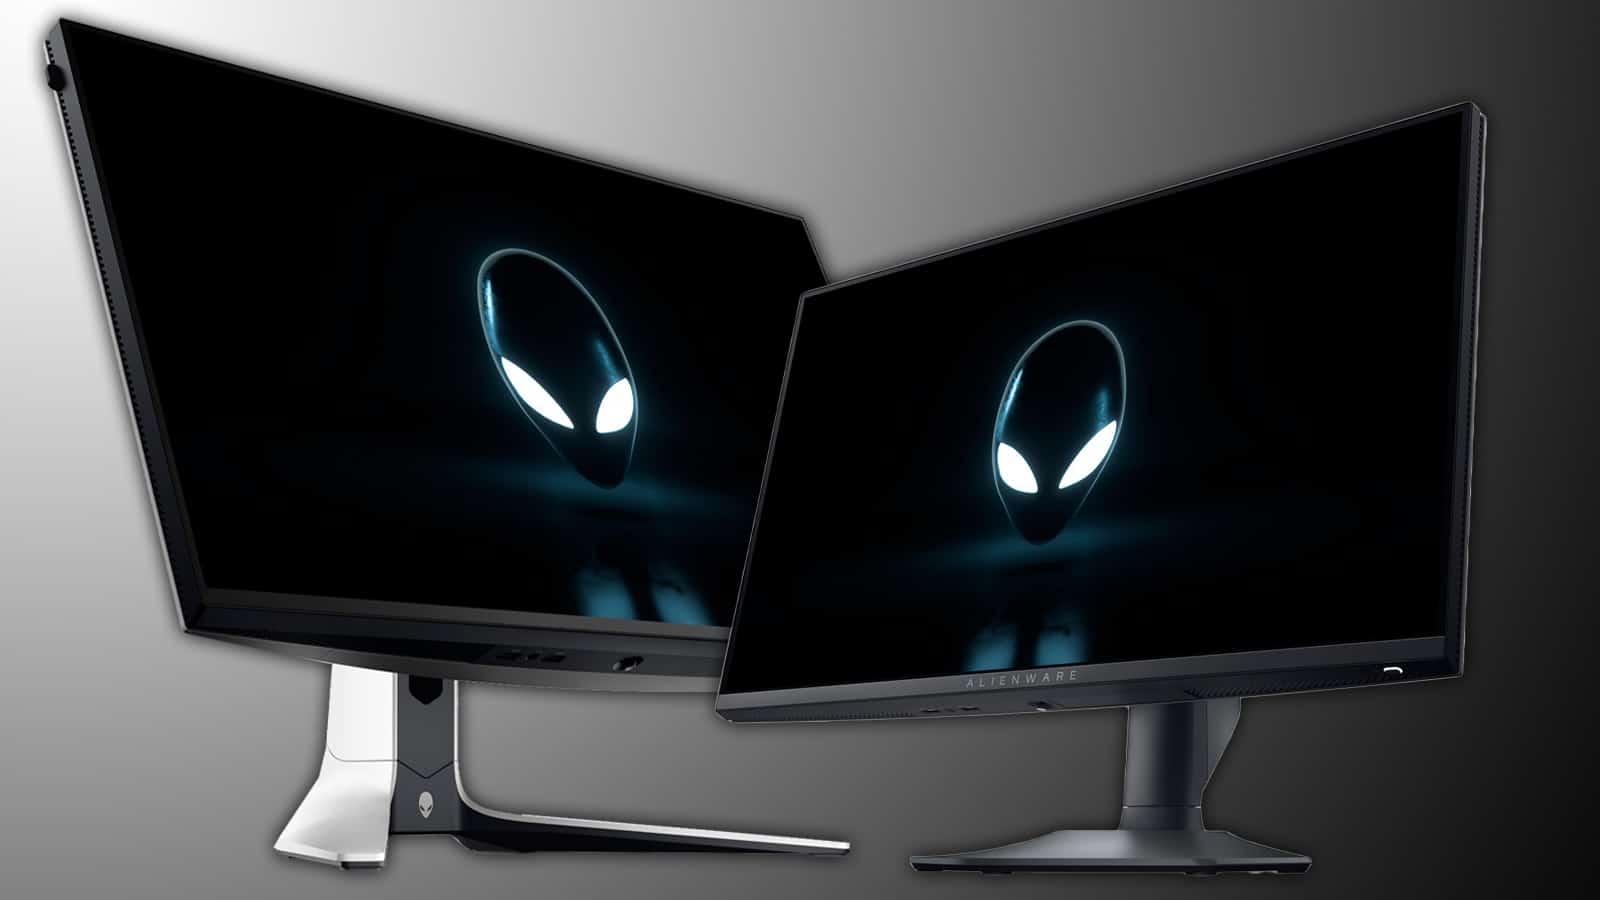  Alienware AW2521H 25 Full HD LED LCD Monitor - 16:9 :  Everything Else